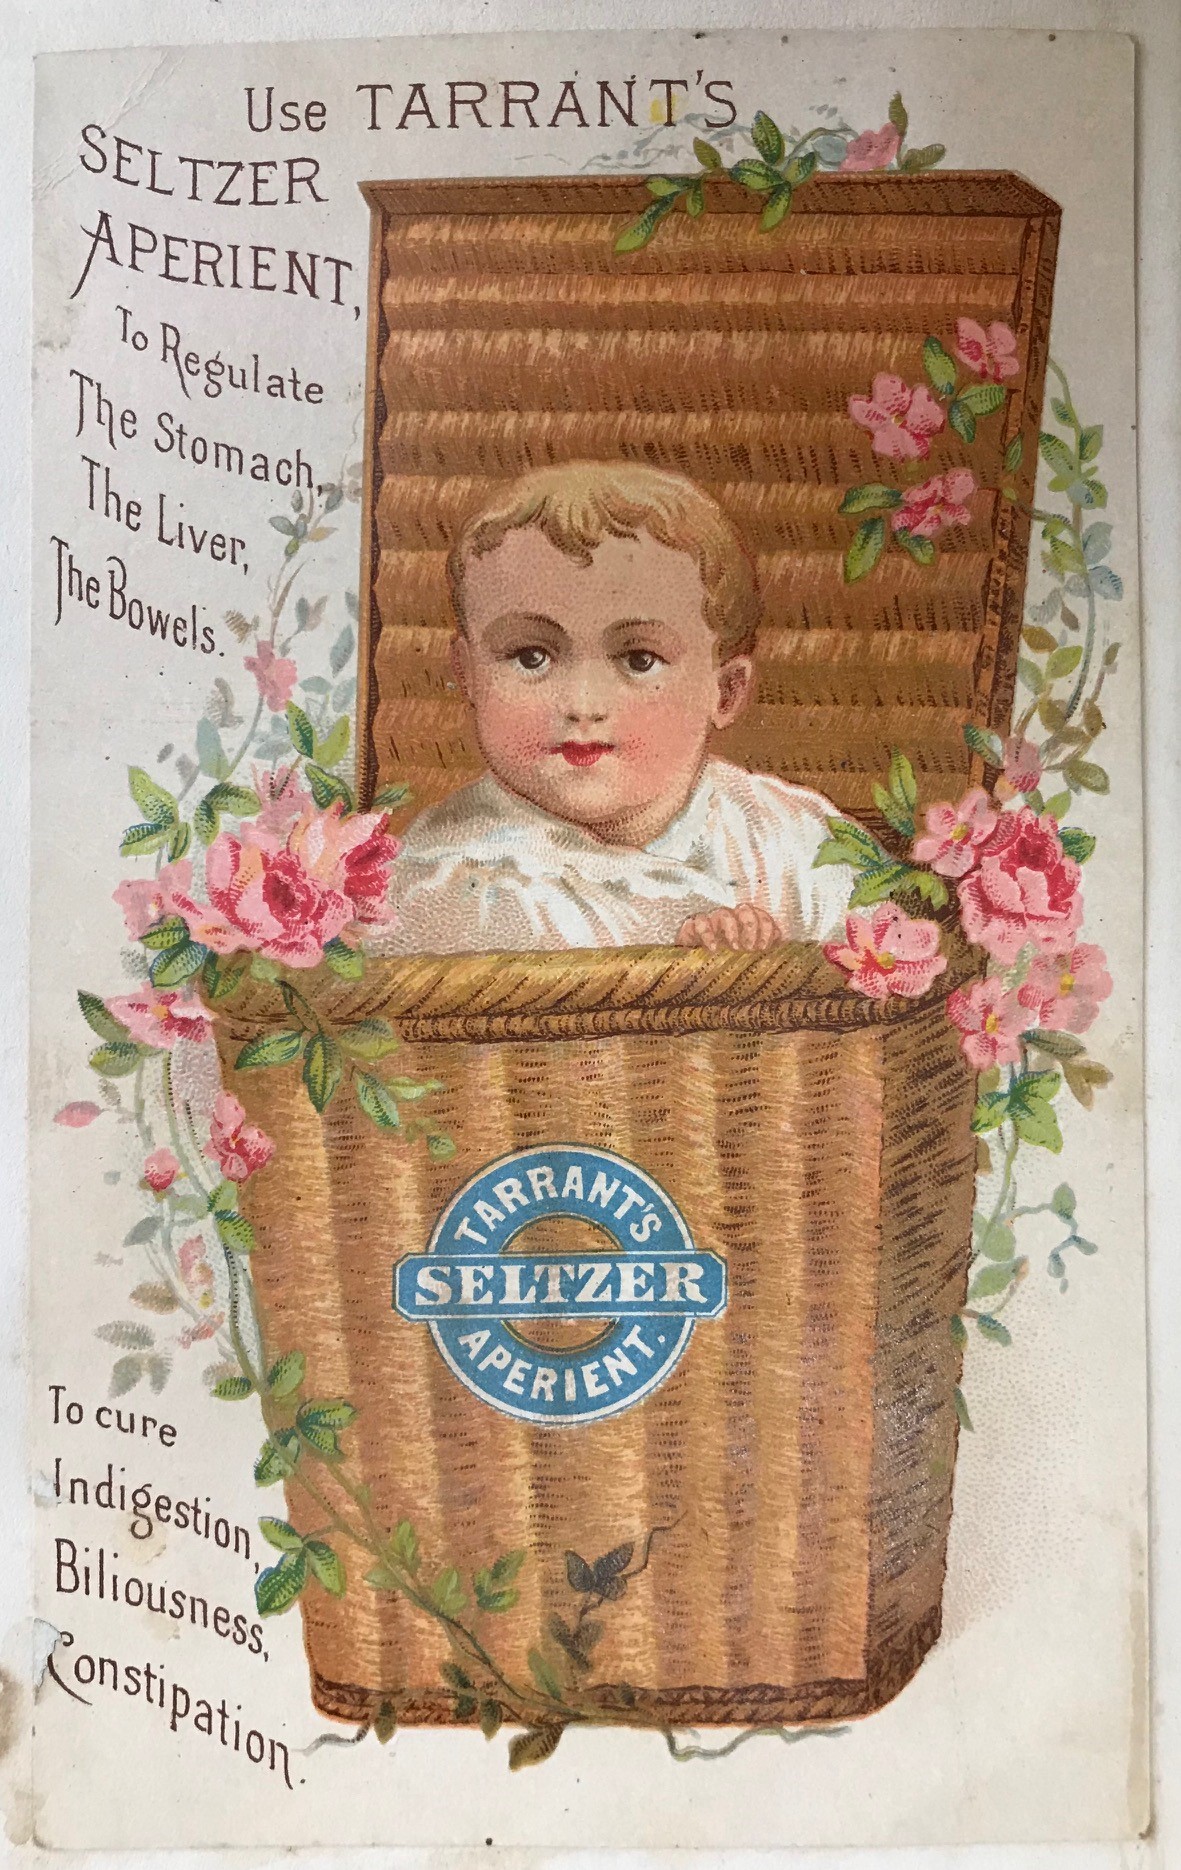 Trade card with a baby in a floral basket advertising Tarrant’s Seltzer Aperient, 1880s